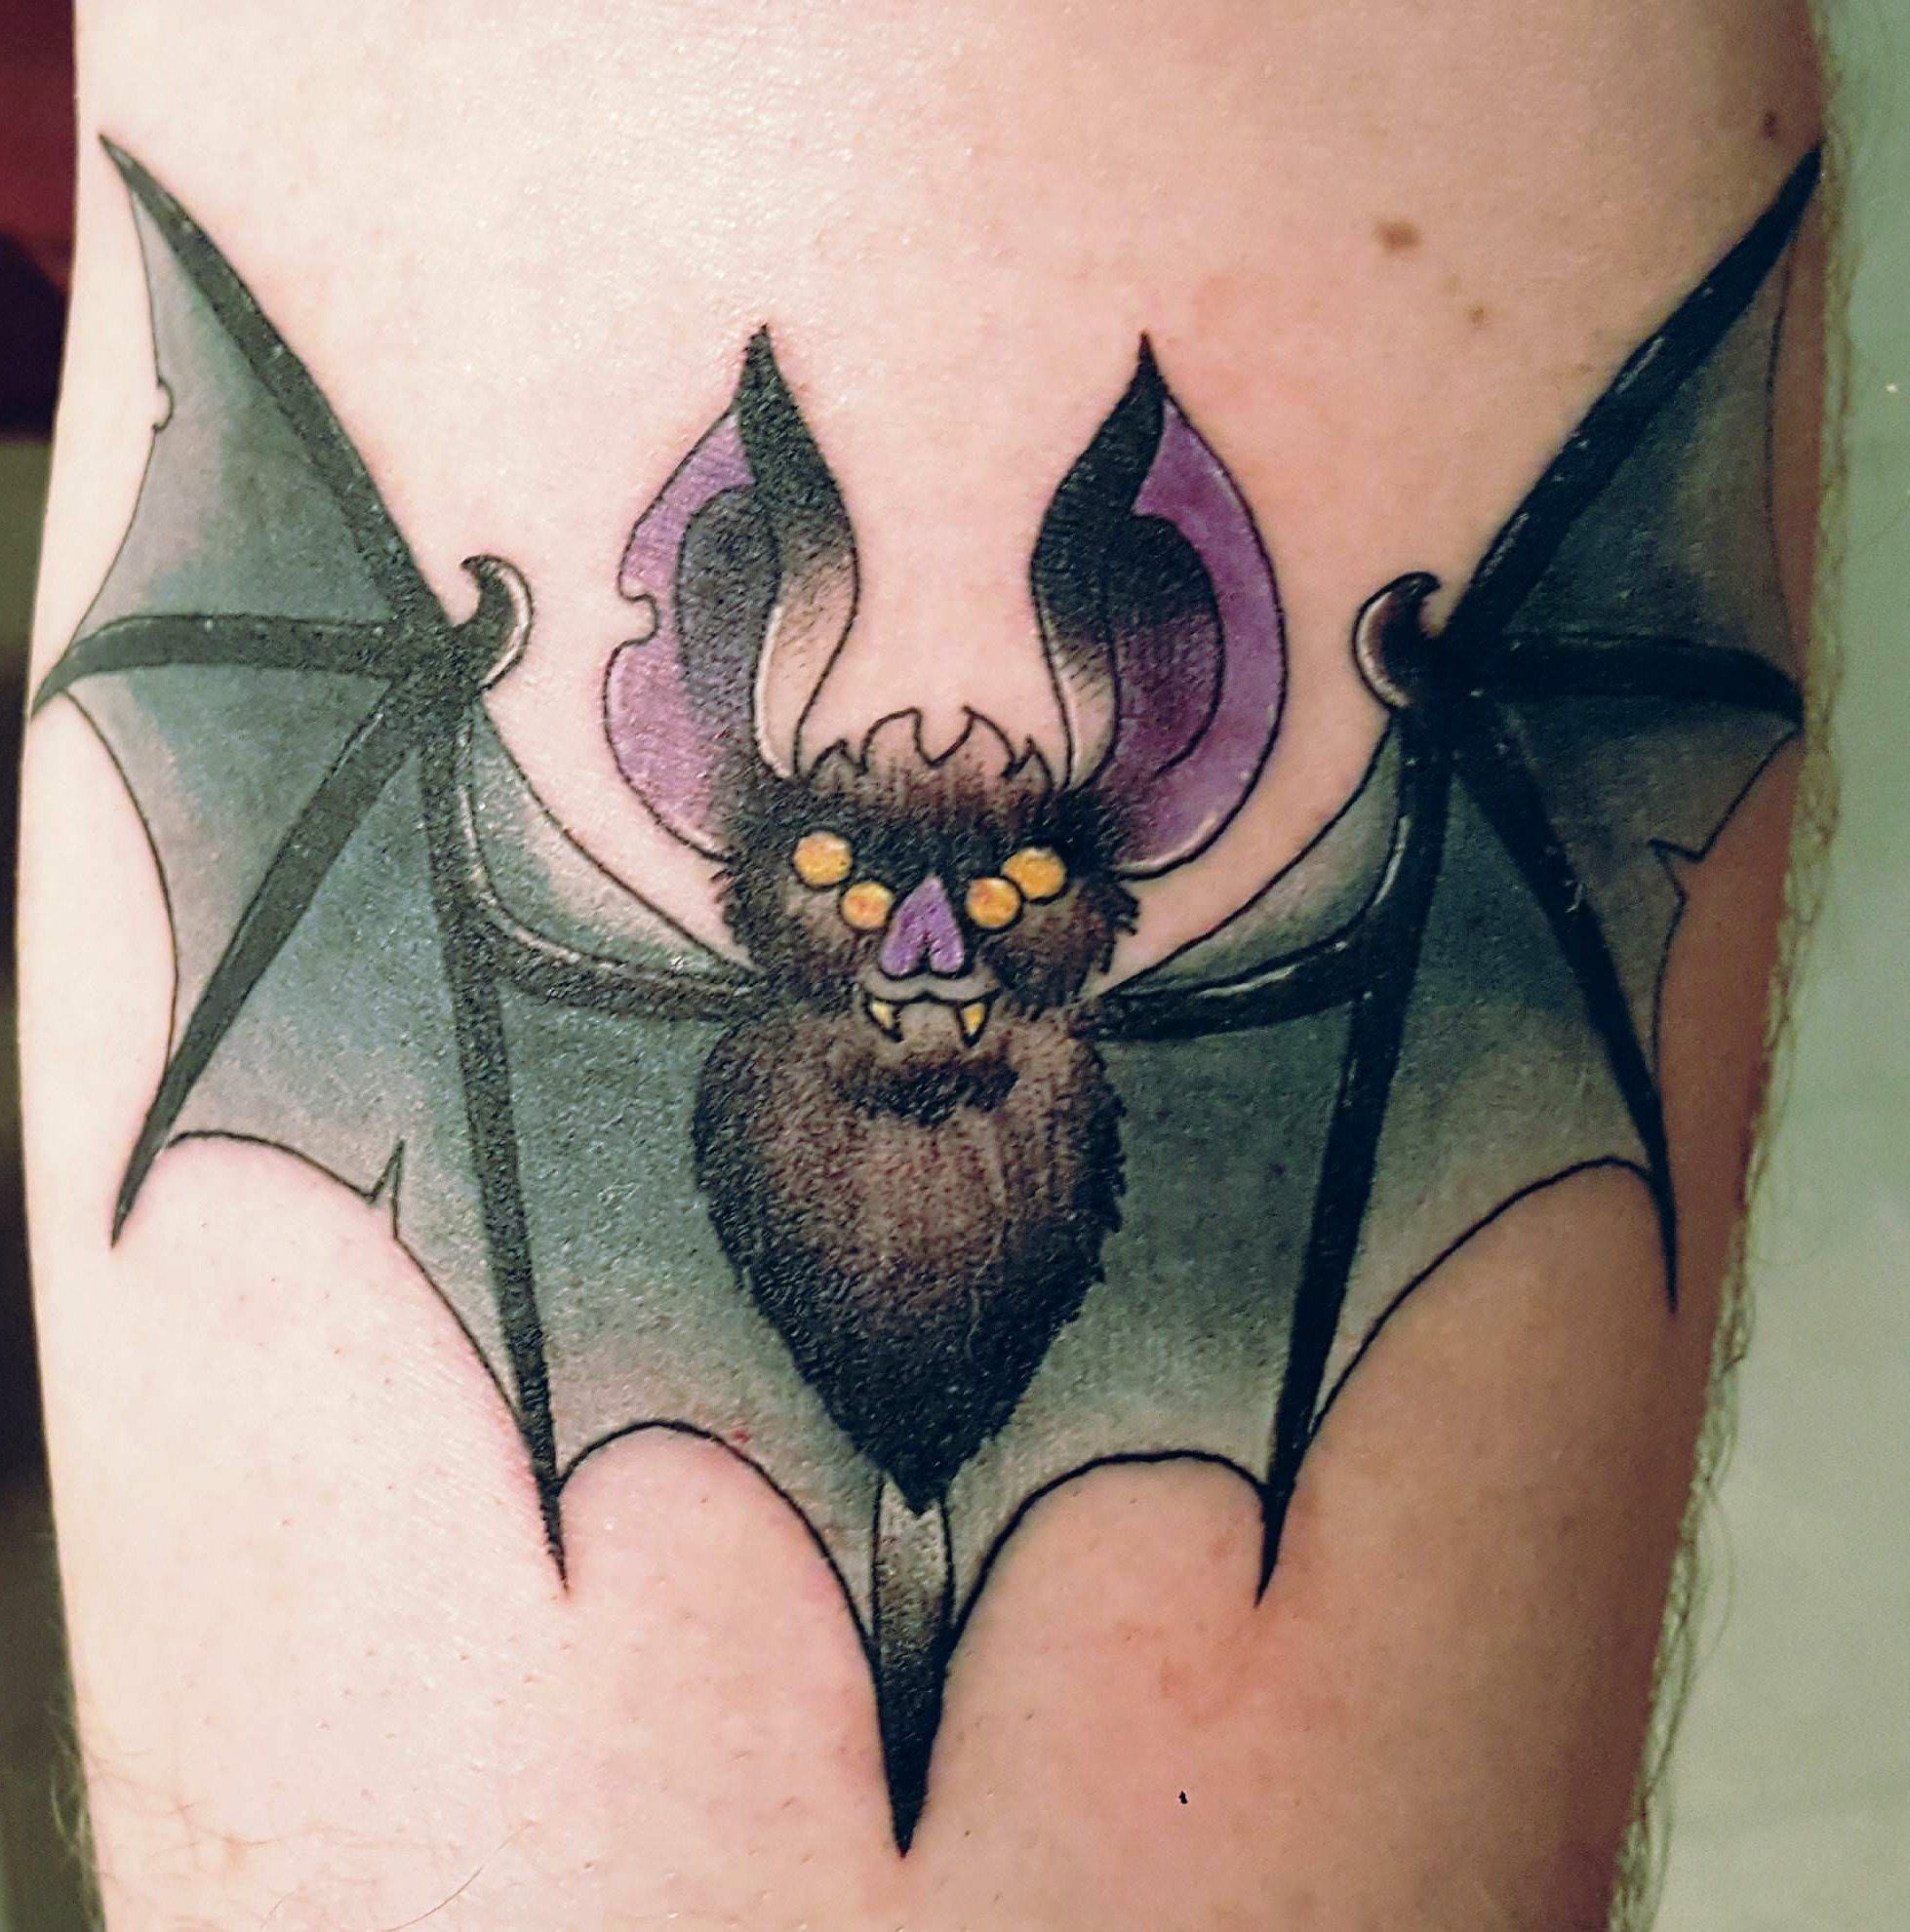 Image Bat forearm piece by Chanty at Six Feet Below, Clearfield, UT #evamig...